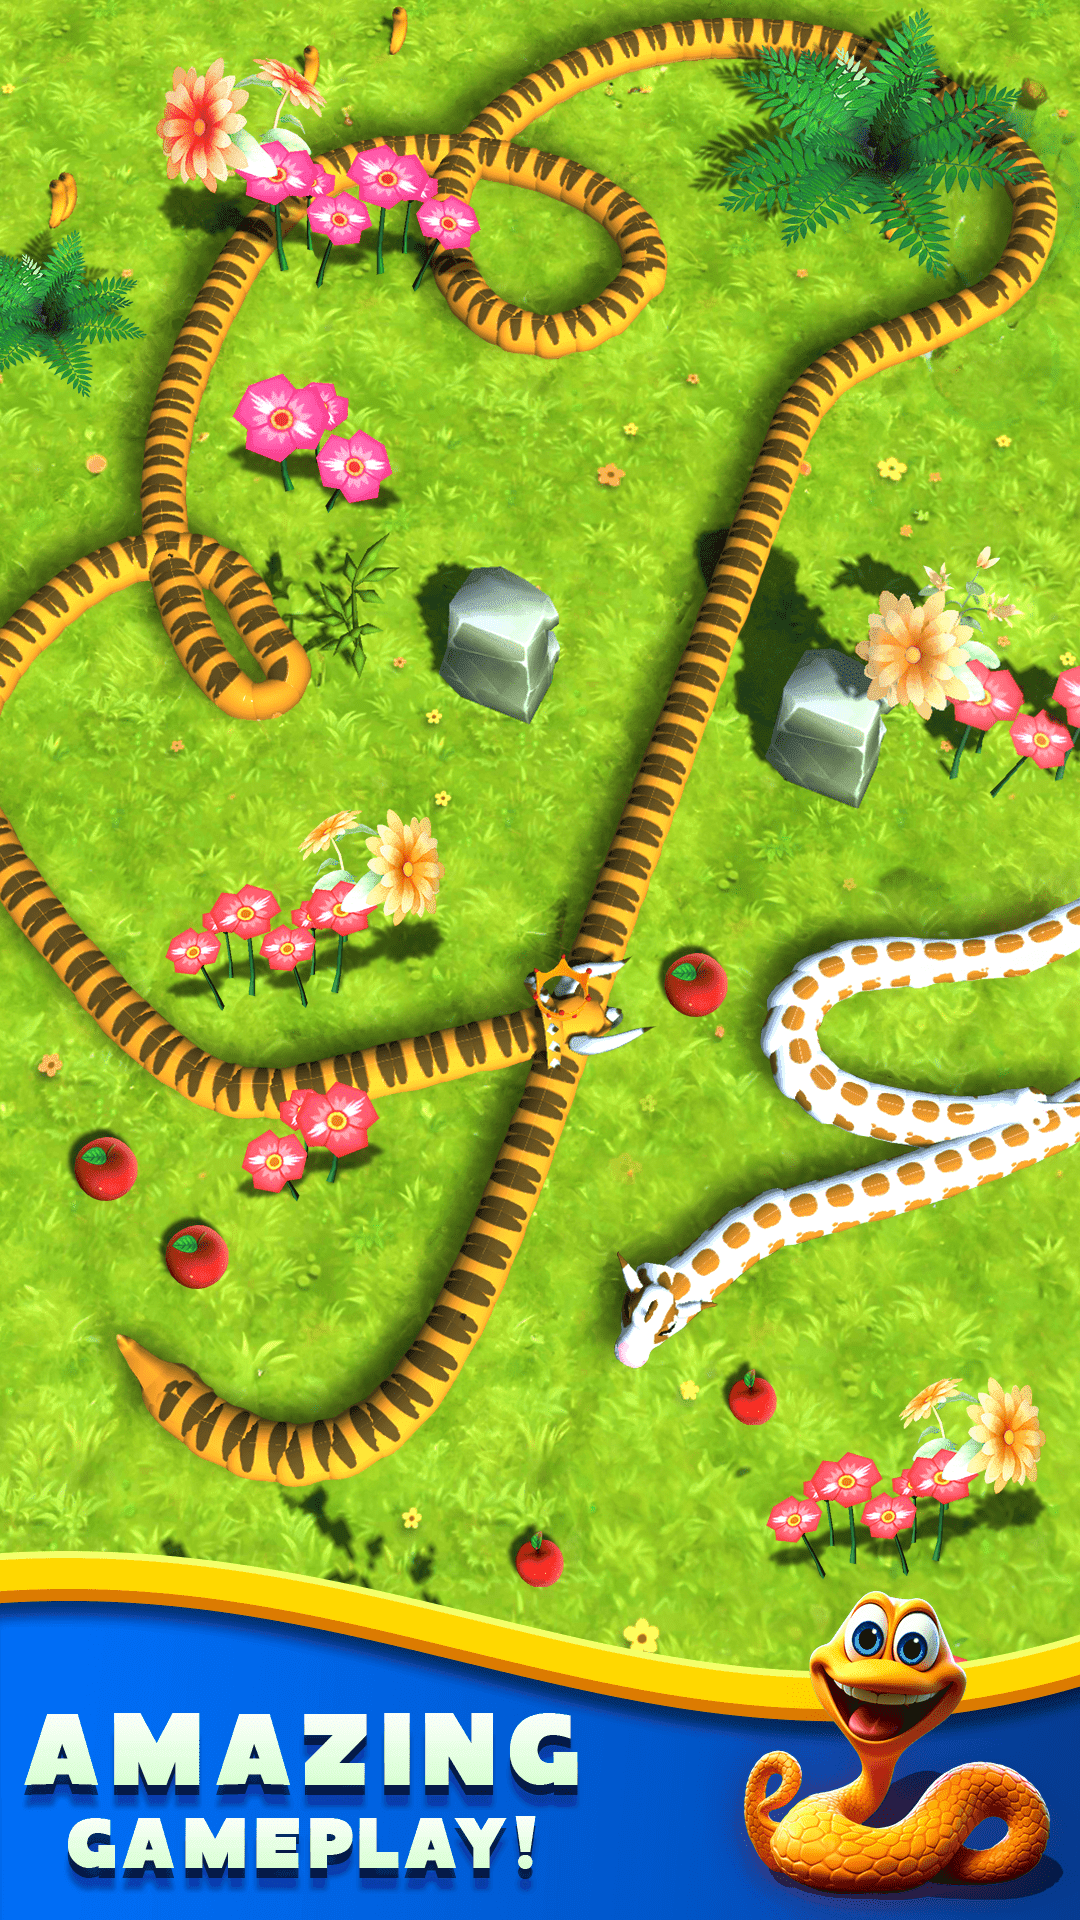 3D Snake . io - APK Download for Android